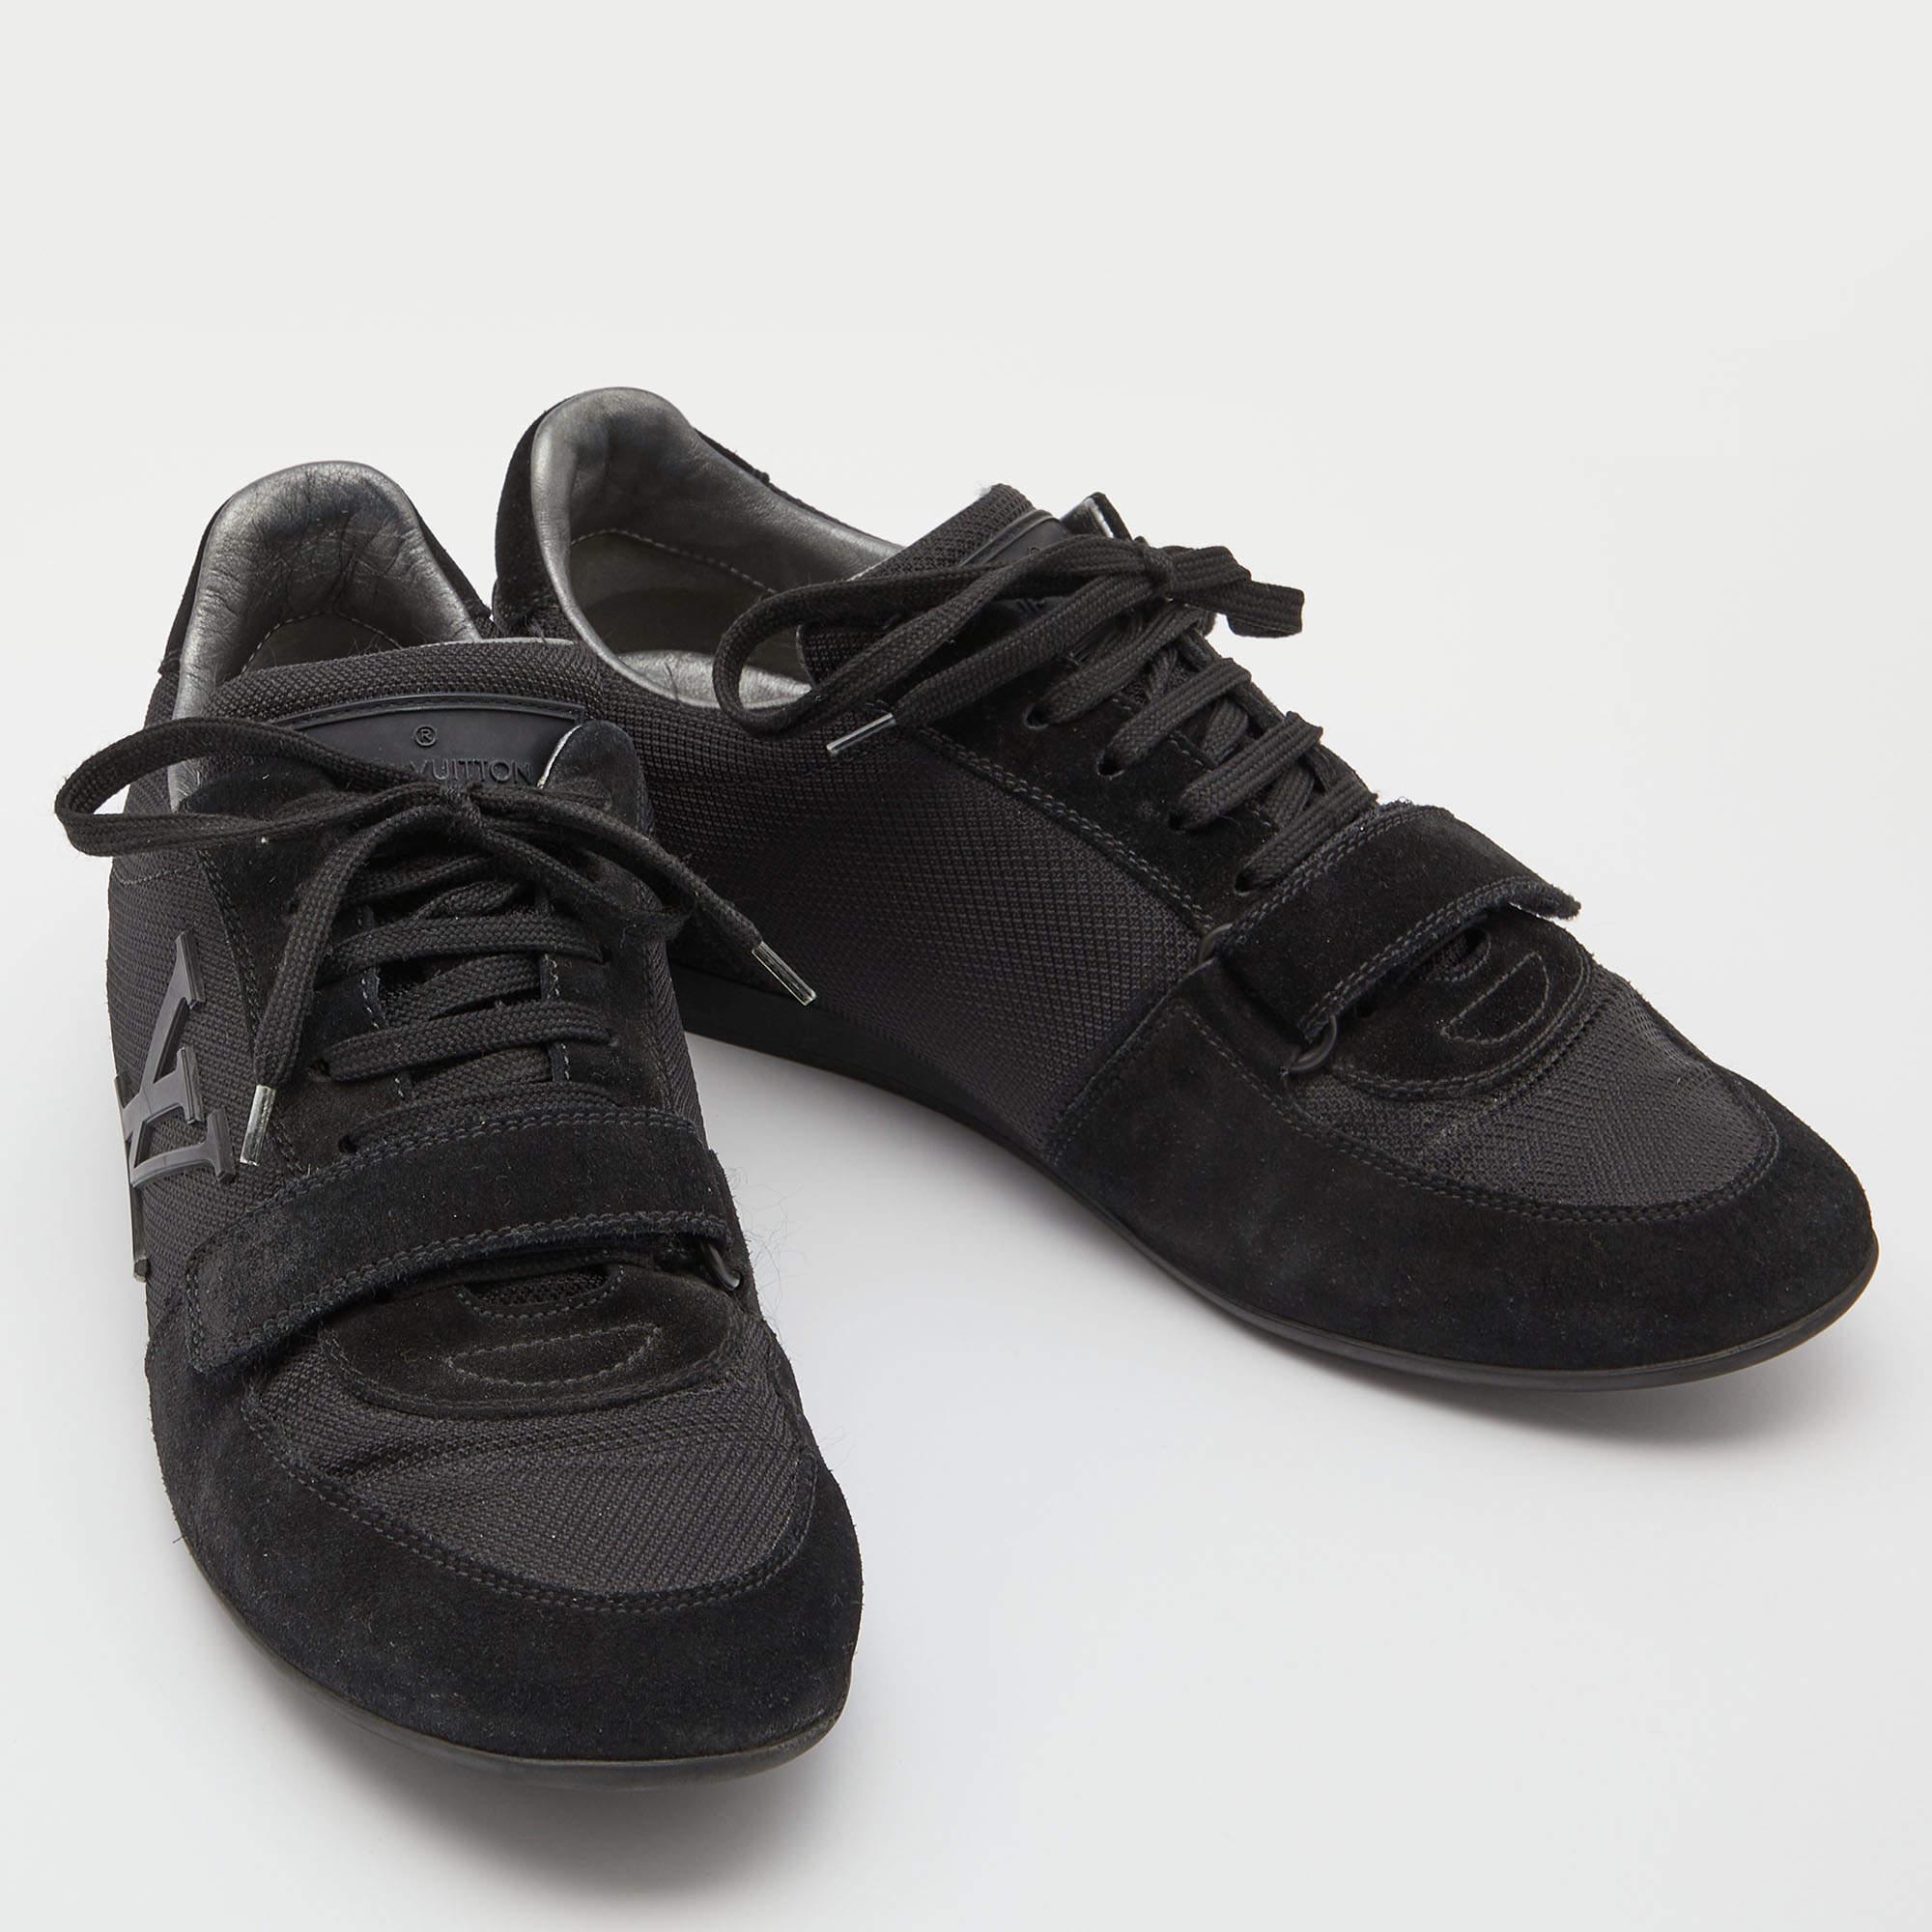 Louis Vuitton Black Suede and Mesh Trainers Low Top Sneakers Size 40 In Good Condition For Sale In Dubai, Al Qouz 2